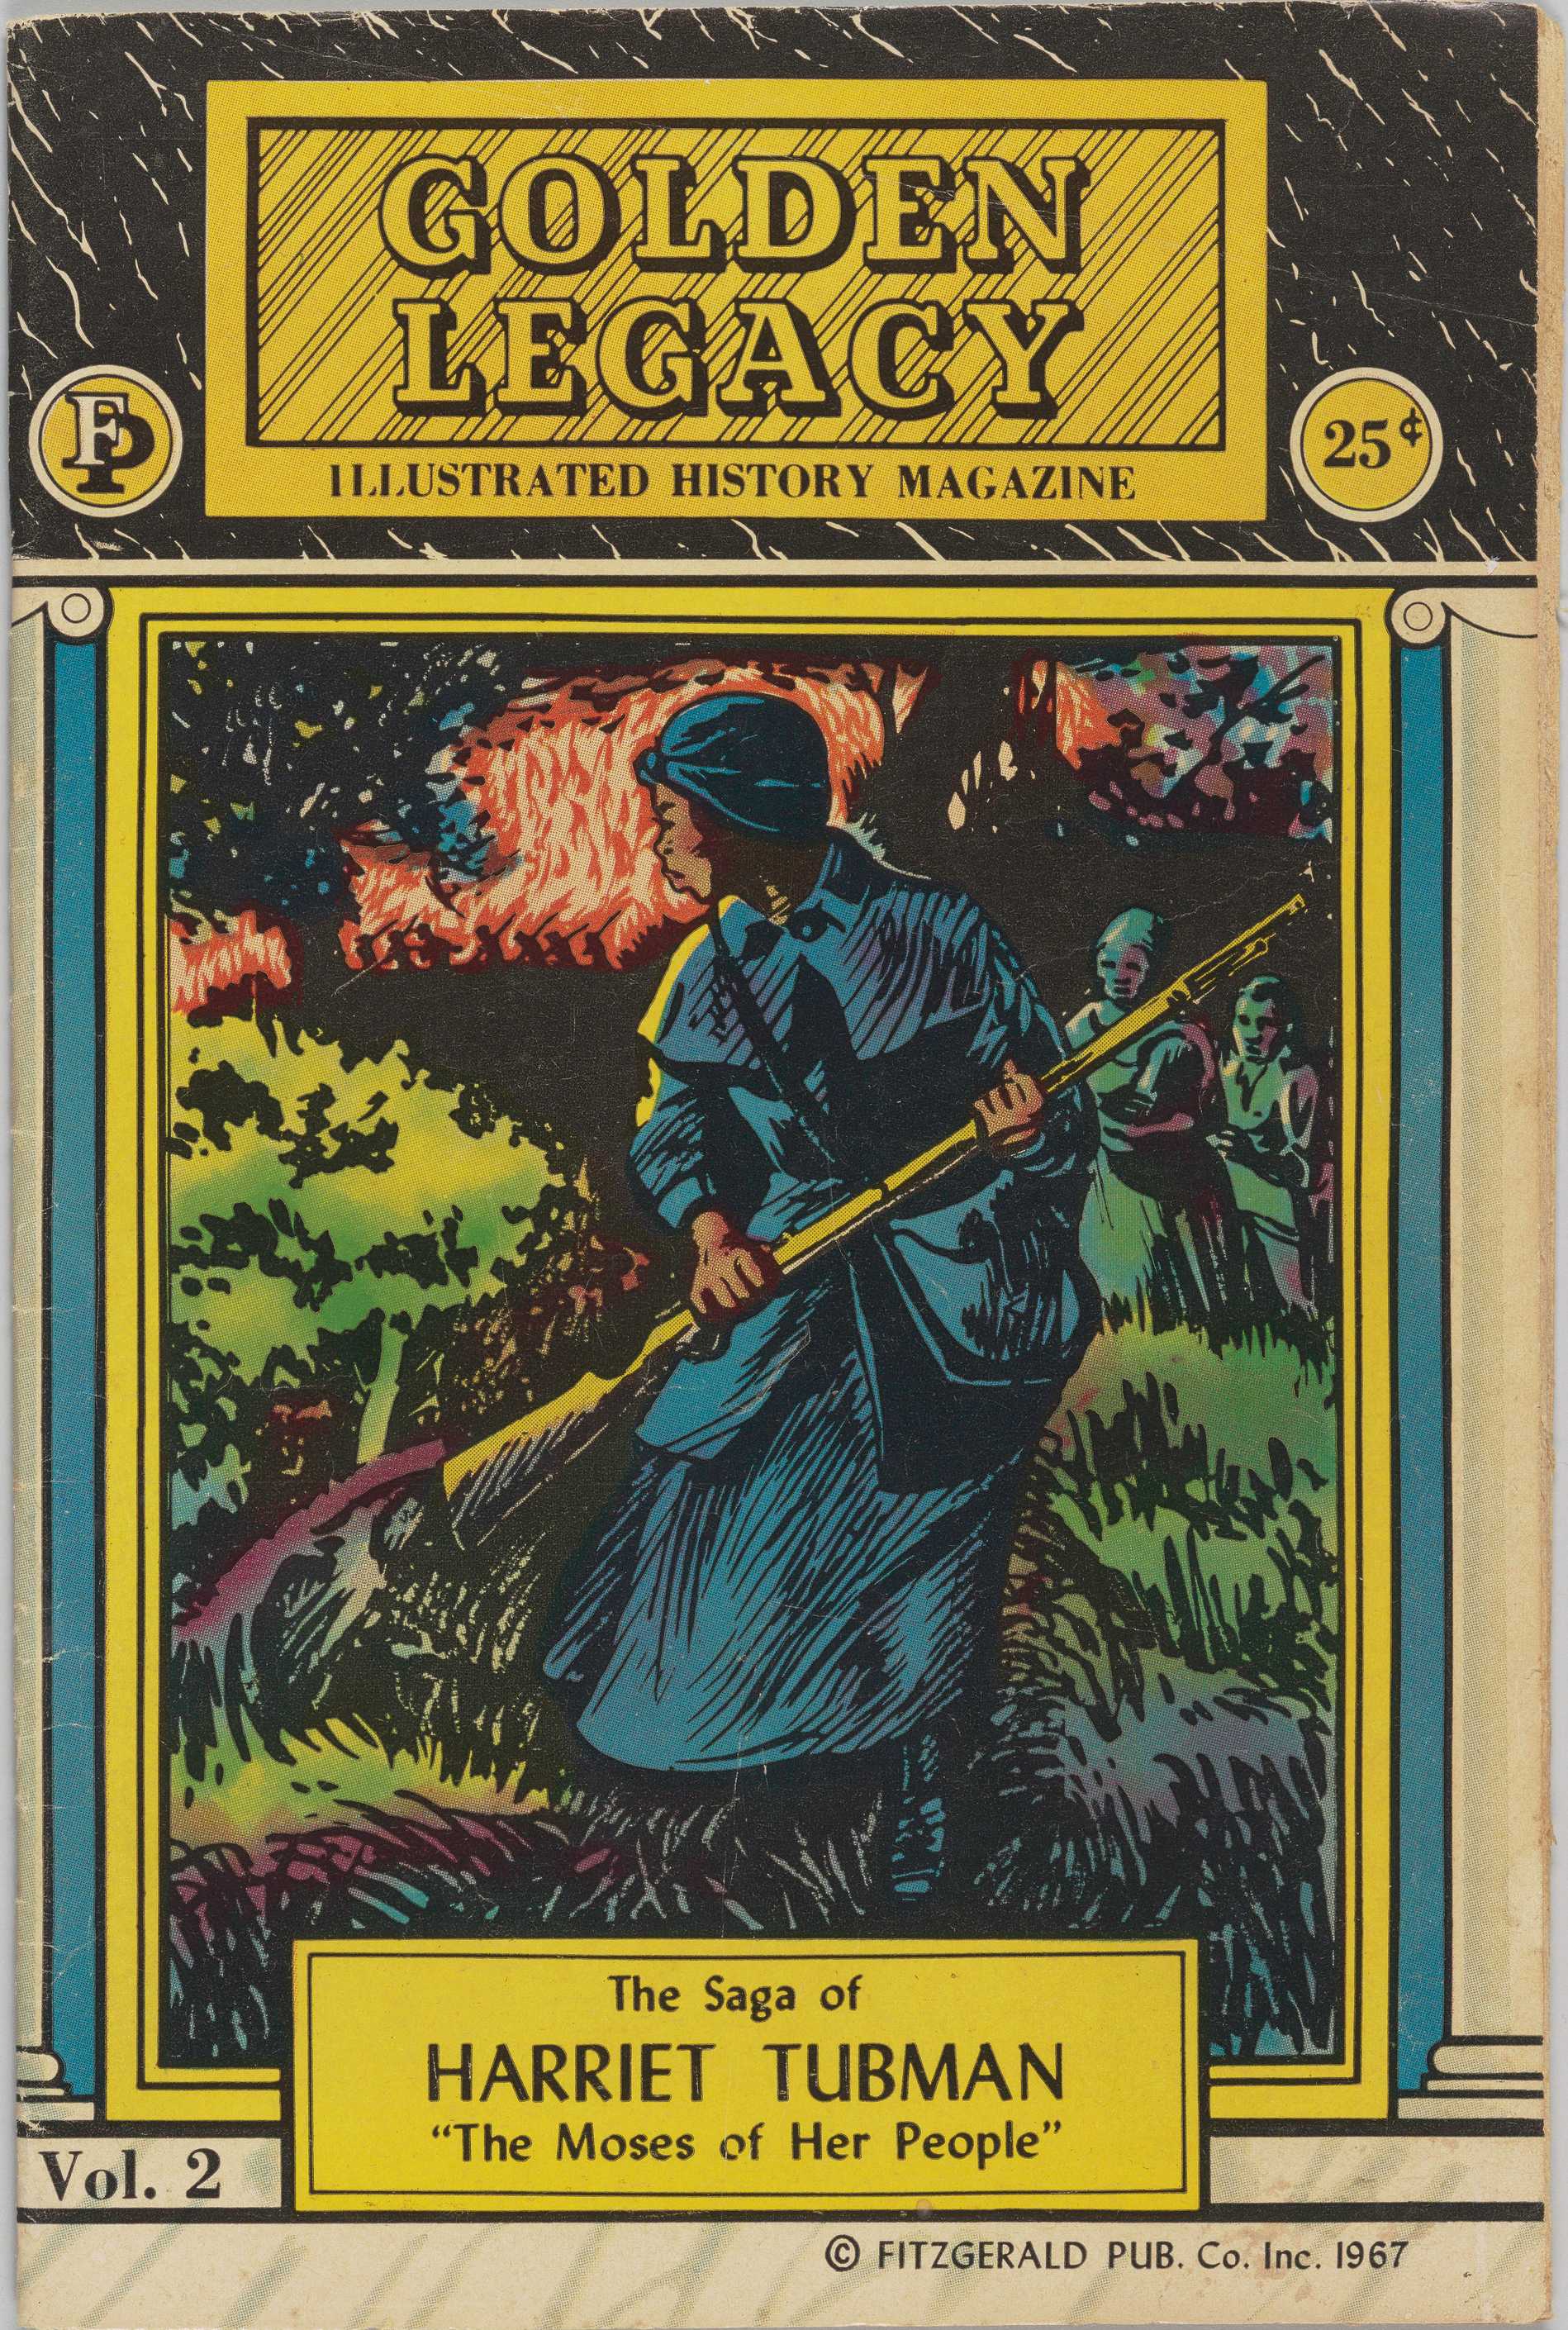 The cover Golden Legacy features a large detailed illustration of Harriet Tubman.  She is wearing a blue coat, shirt, satchel bag.